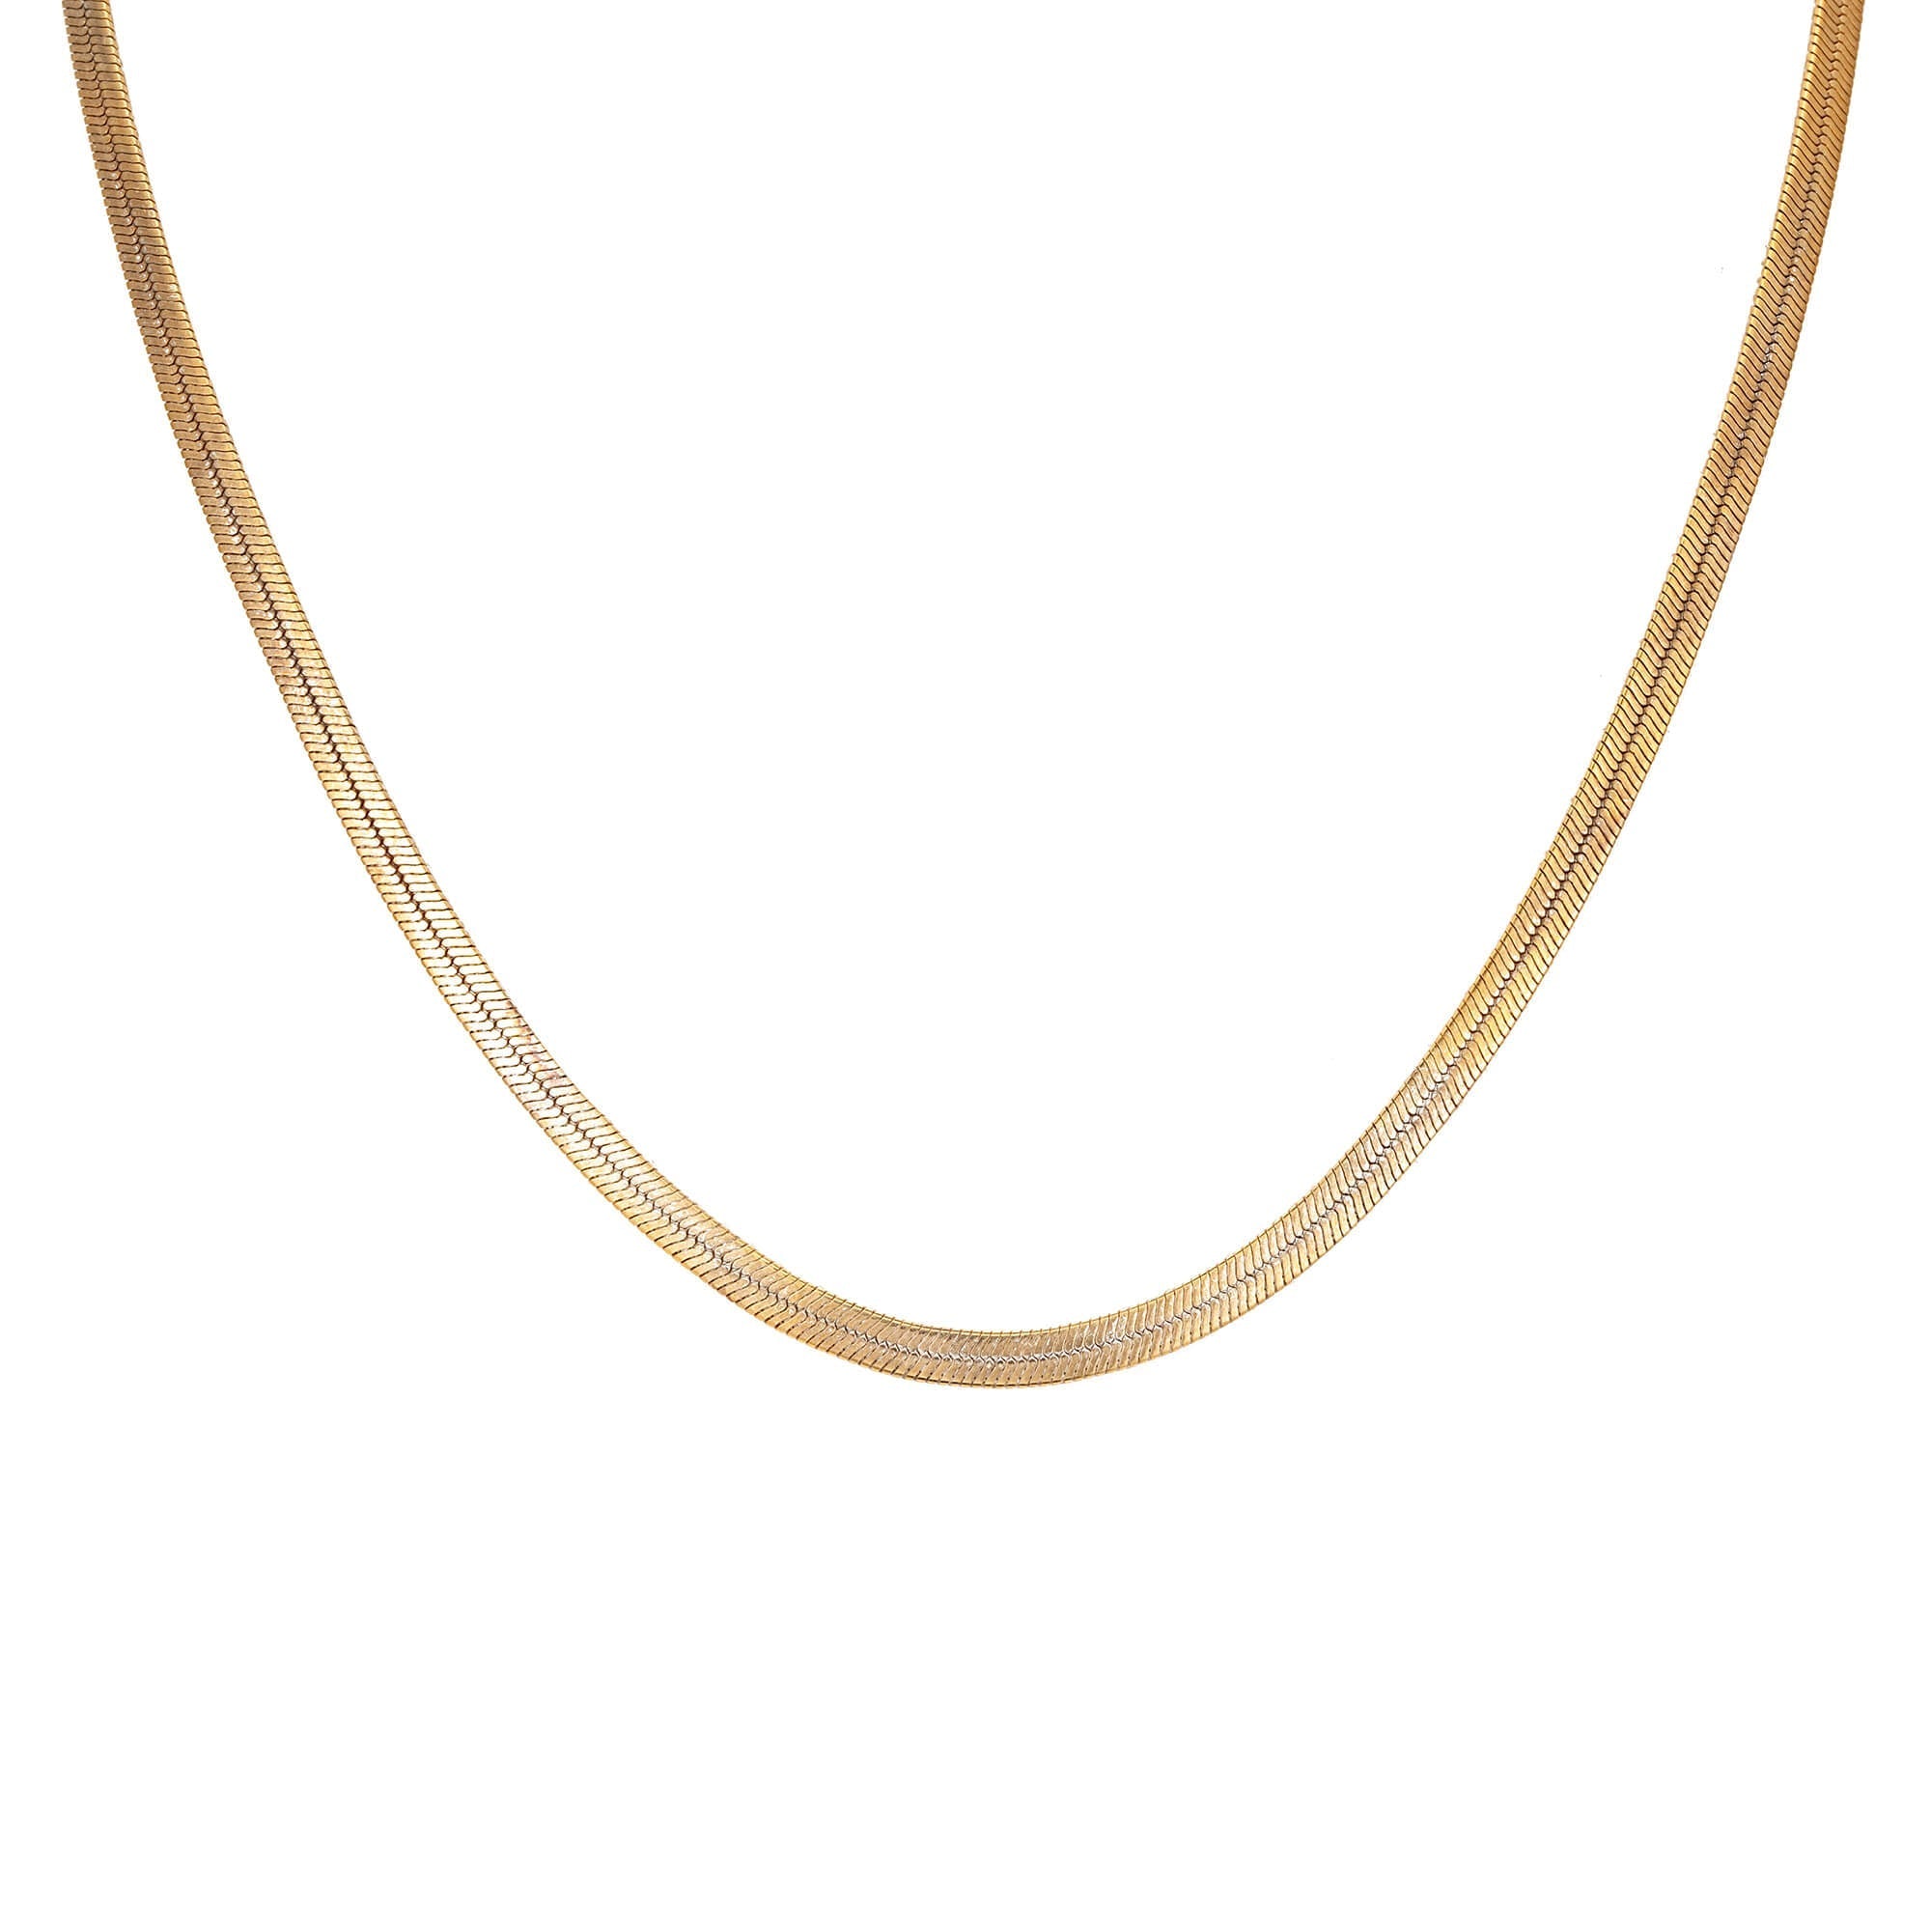 Gold snake chain - seolgold